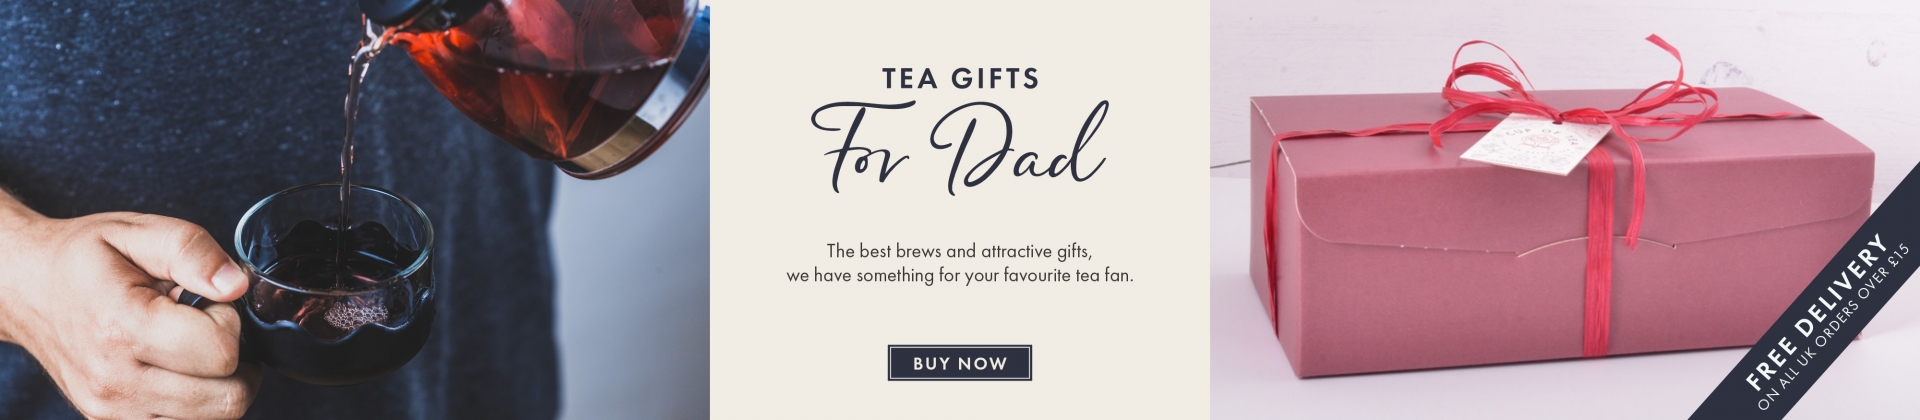 Tea Gifts For Dad